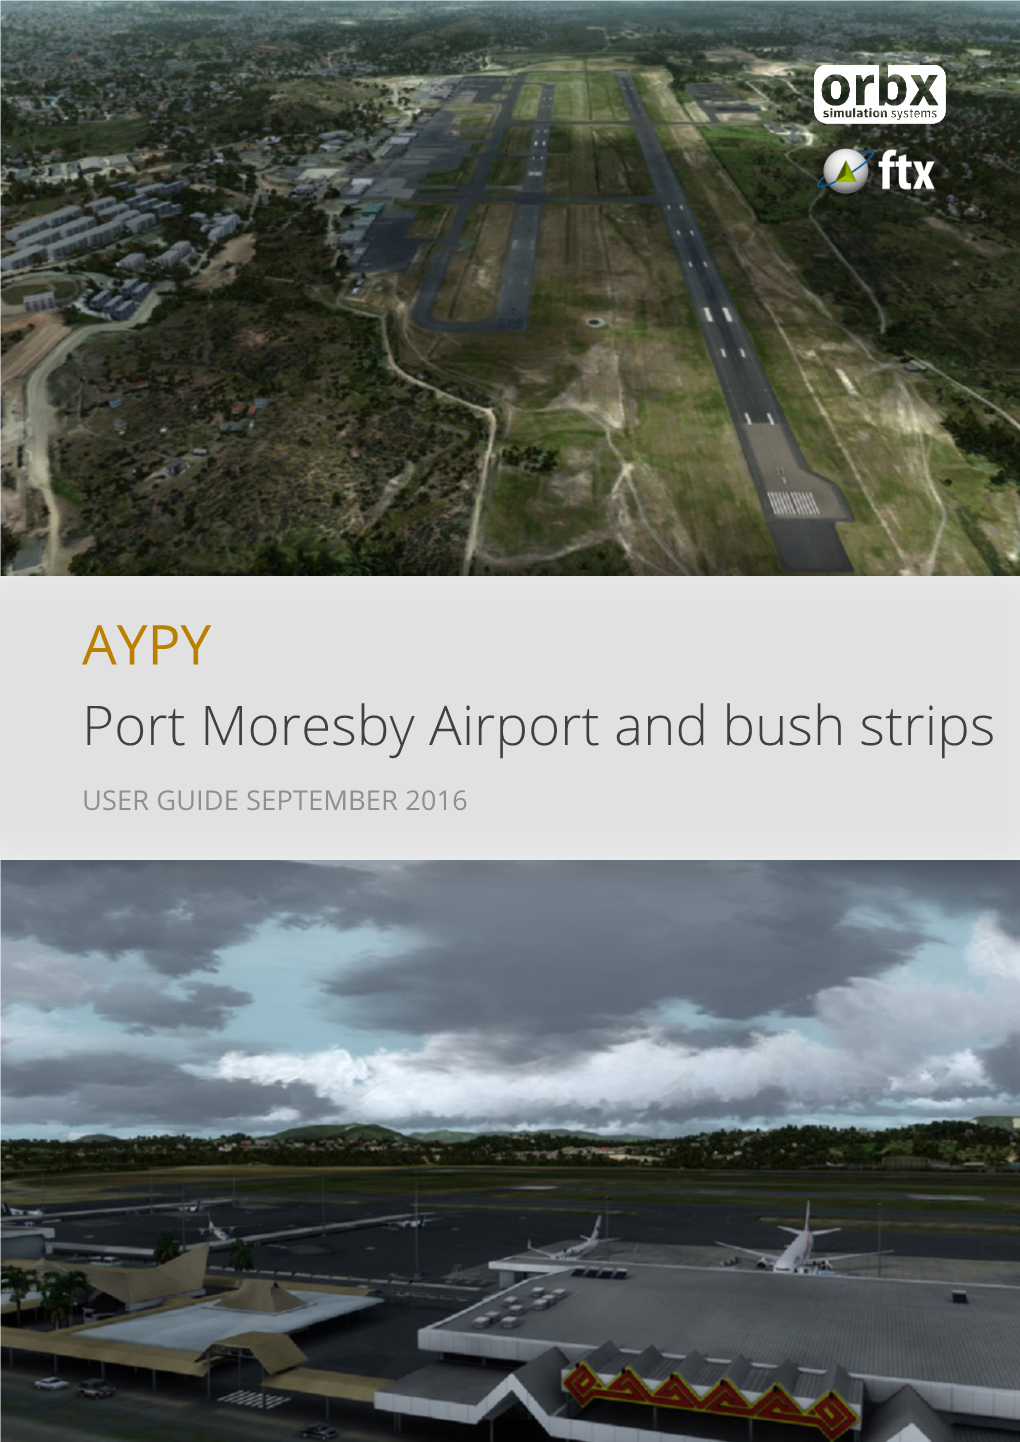 AYPY Port Moresby Airport and Bush Strips